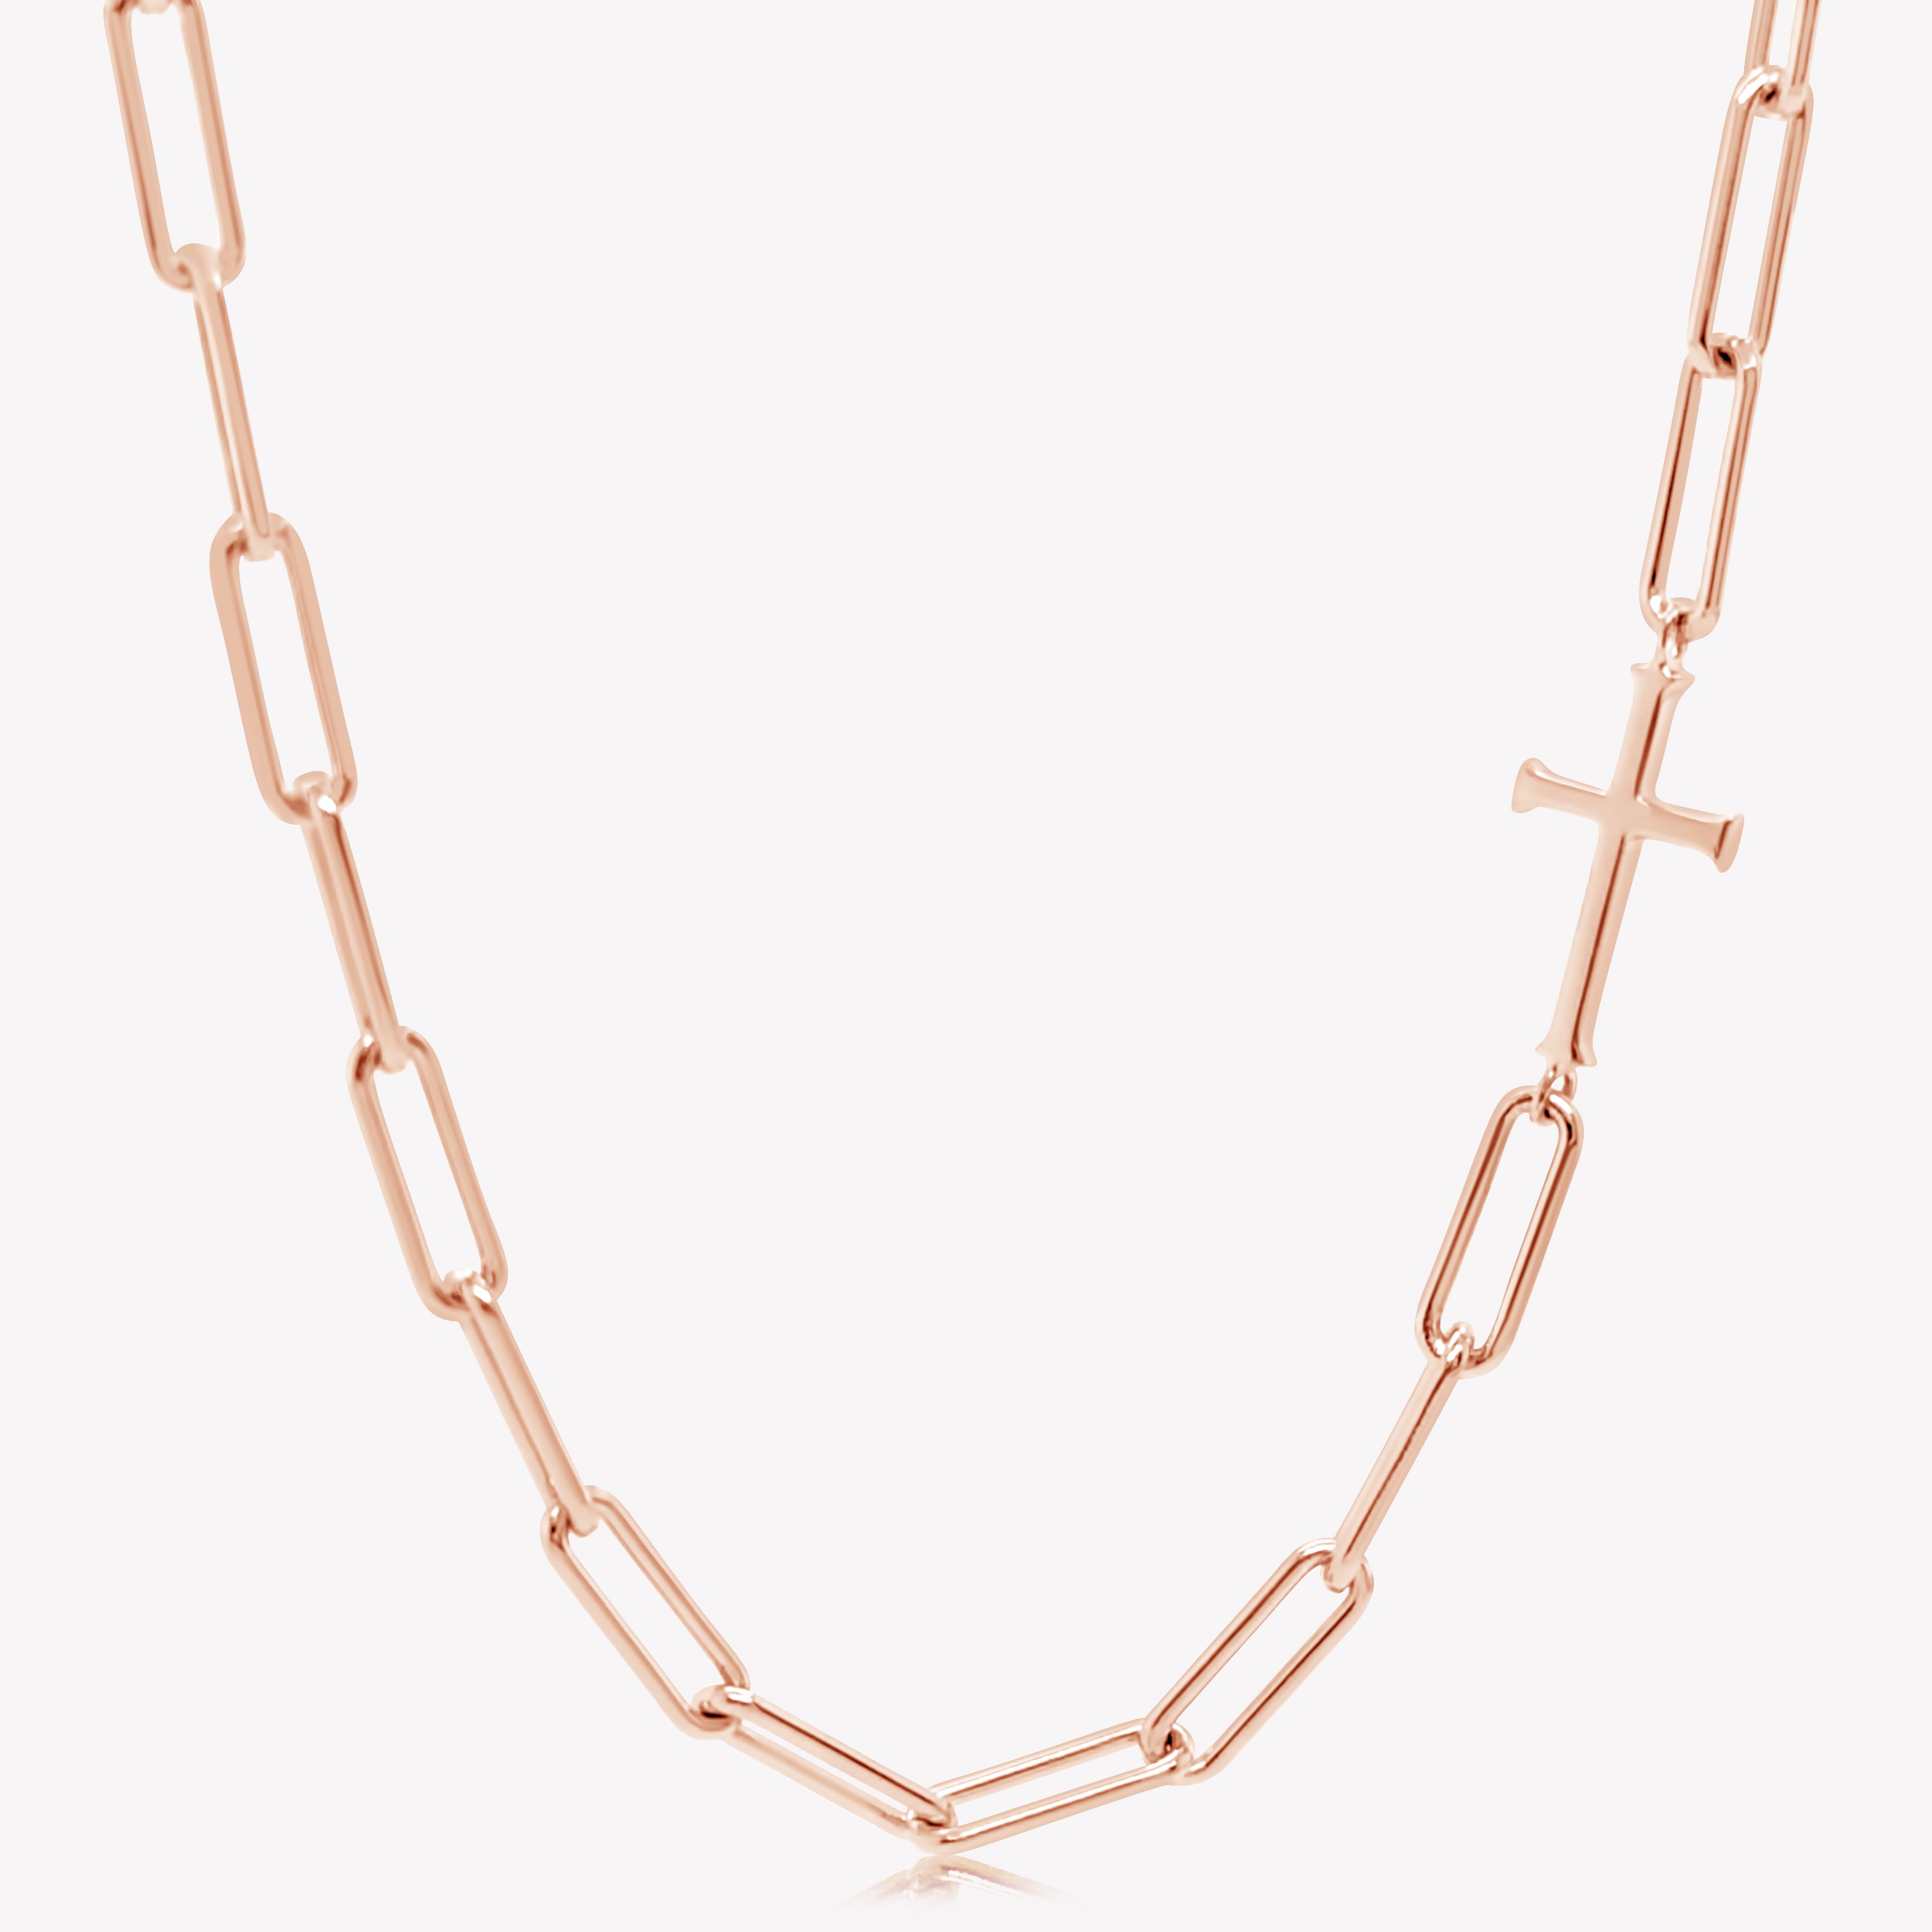 Rizen Jewelry Chain Breaker necklace in 18kt rose gold.  Elegant Cross Pendant breaks up the paper clip link chain with classic lobster clasp  closure. 